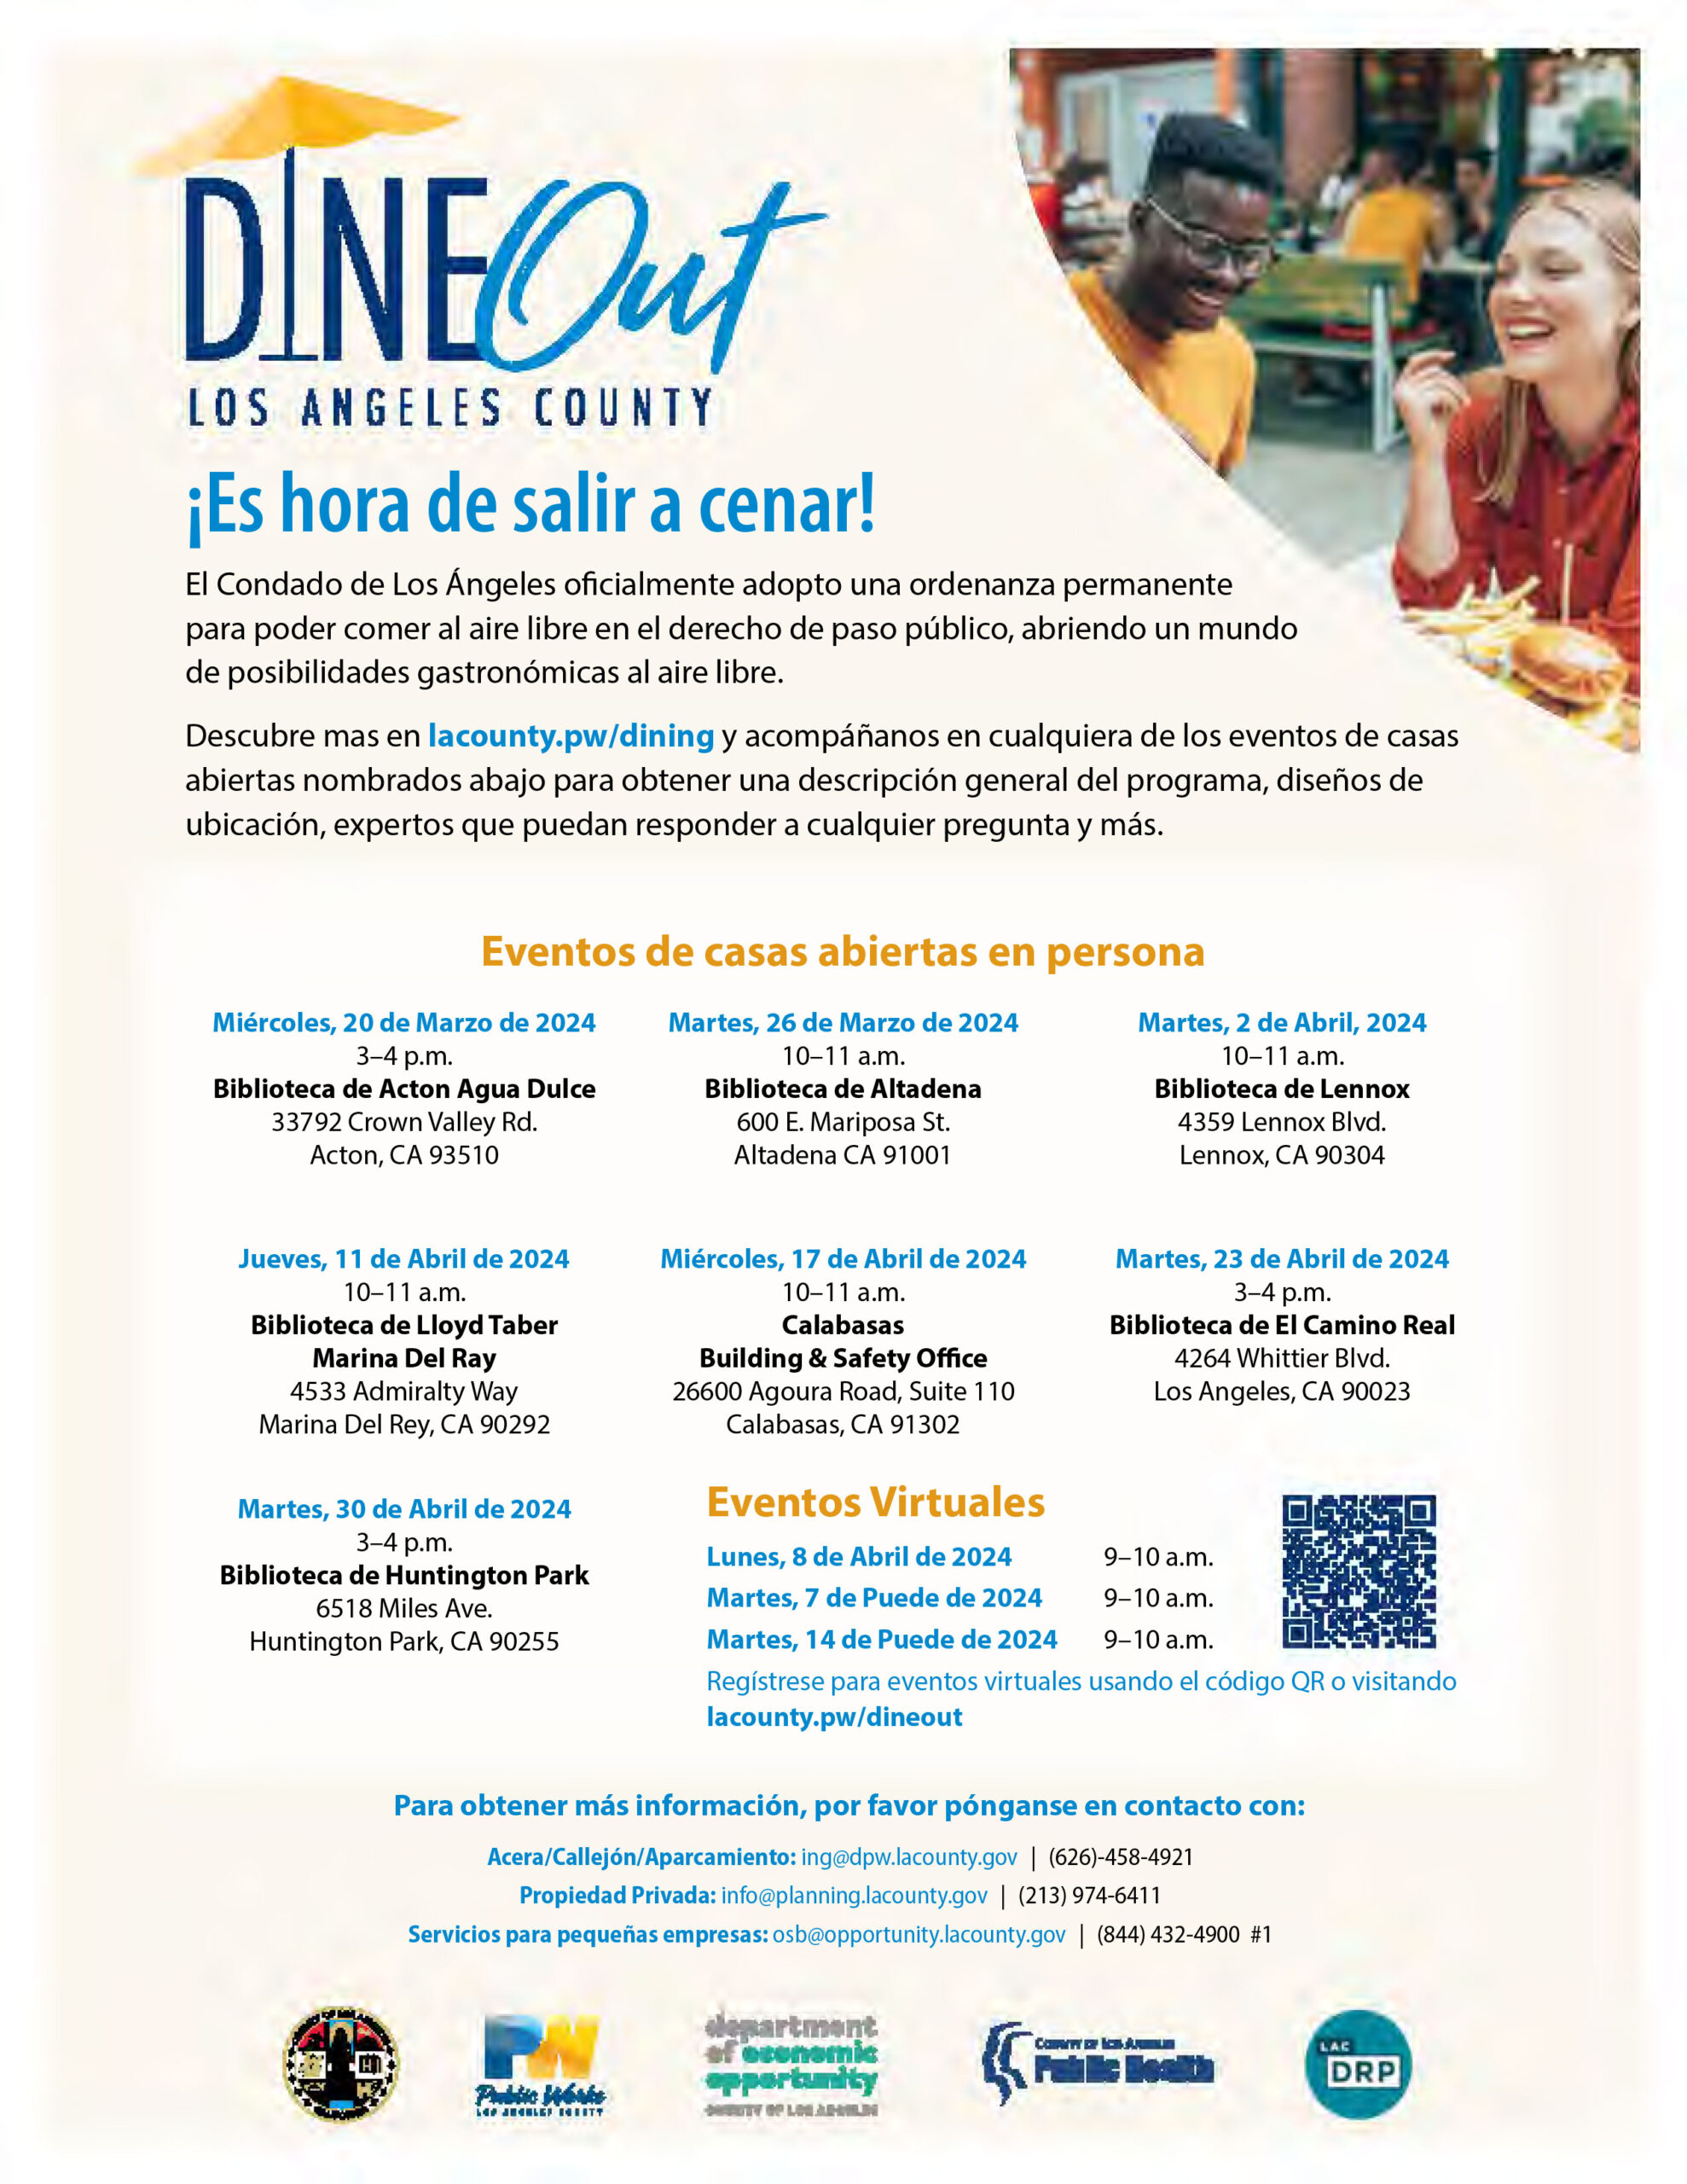 Dine Out LA County campaign flyer in Spanish 